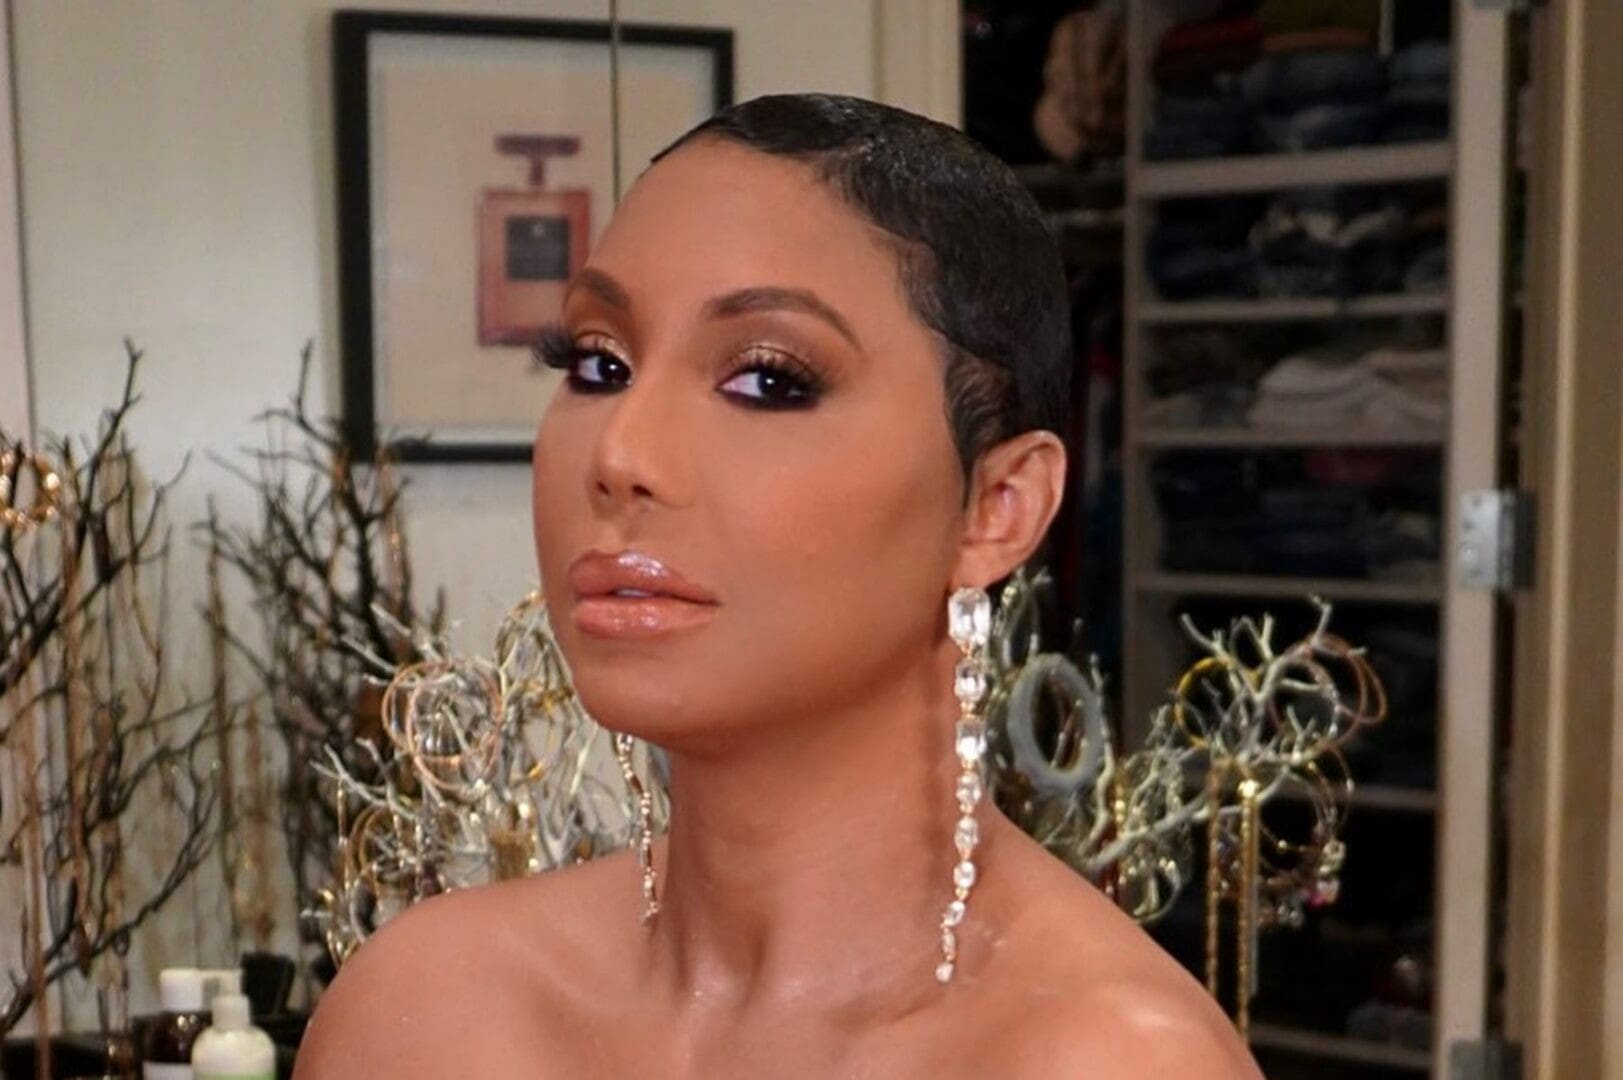 Tamar Braxton Shares A Funny Message About Edges - Check It Out Here